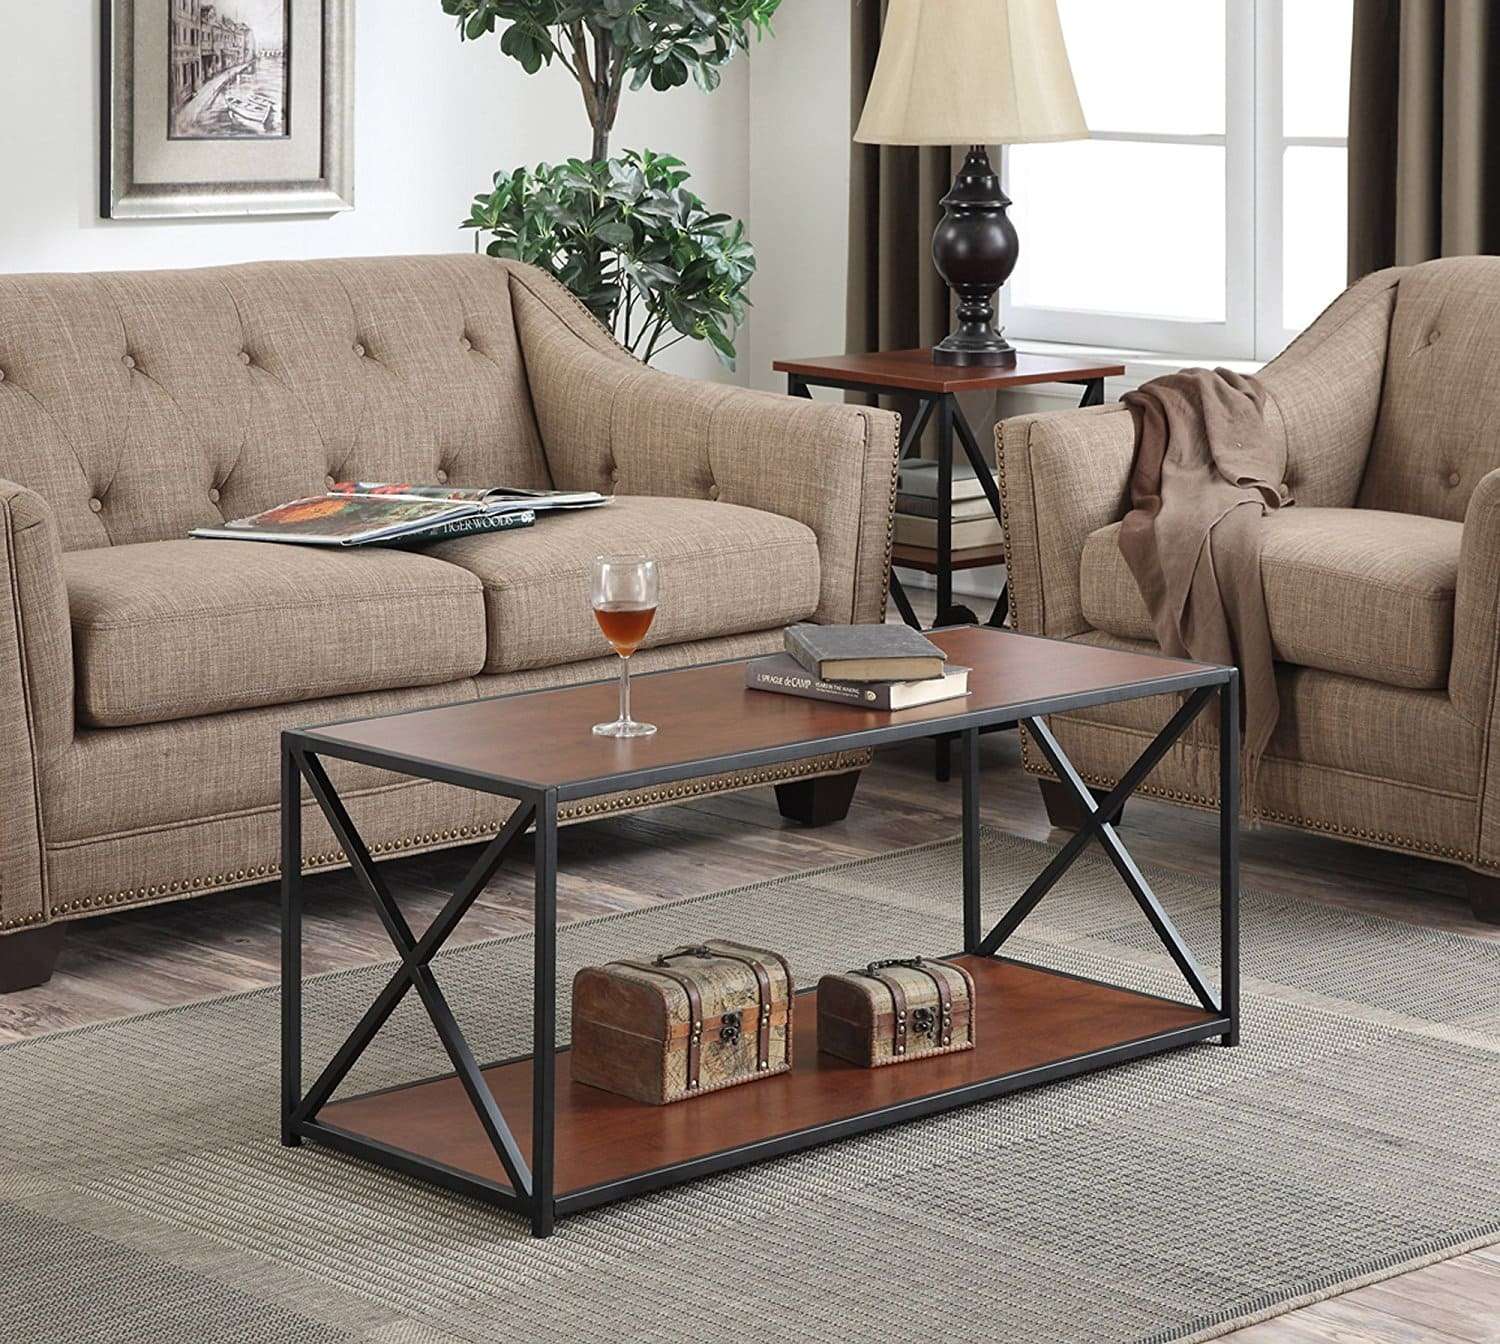 Cheap Coffee Tables: The Ultimate Guide to Coffee Tables ...